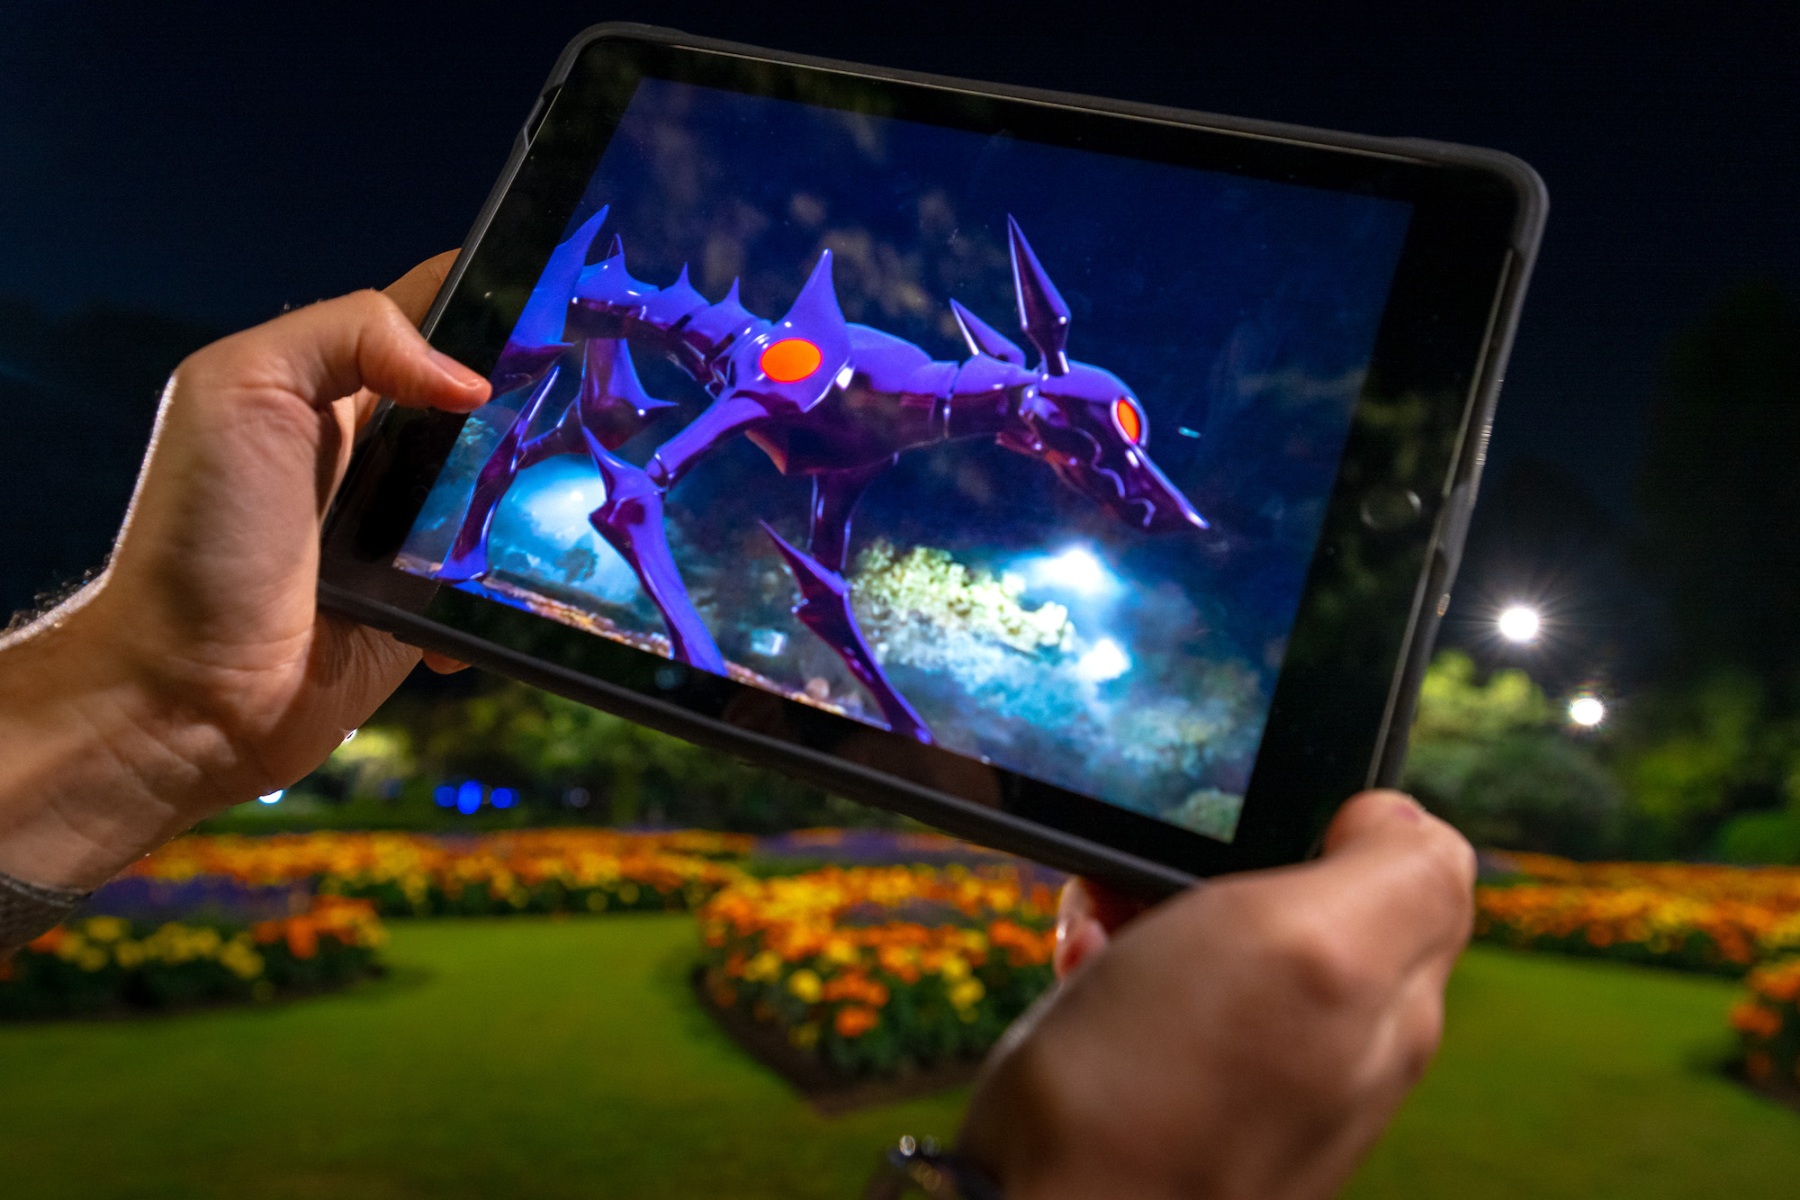 A gigantic, robotic creature looms above the Botanic Gardens’ decorative flower beds on a spectator’s tablet screen